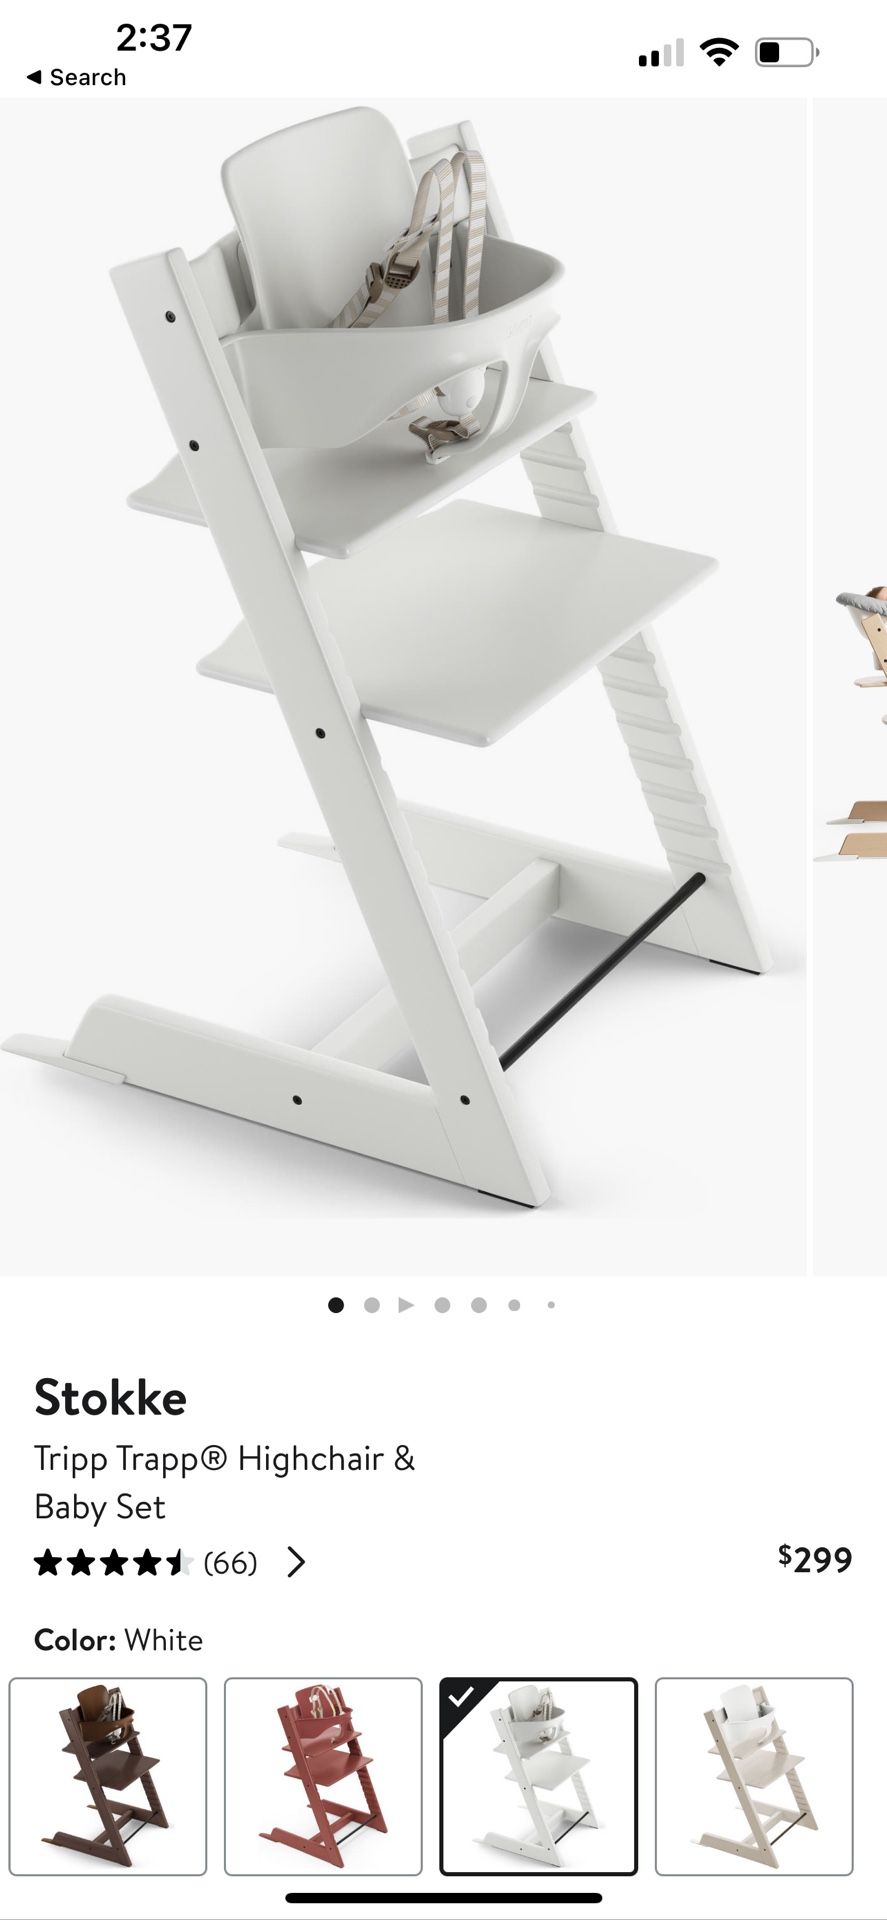 Stokke High Chair Including Baby Set and Harness- Tripp Trapp Highchair In White 